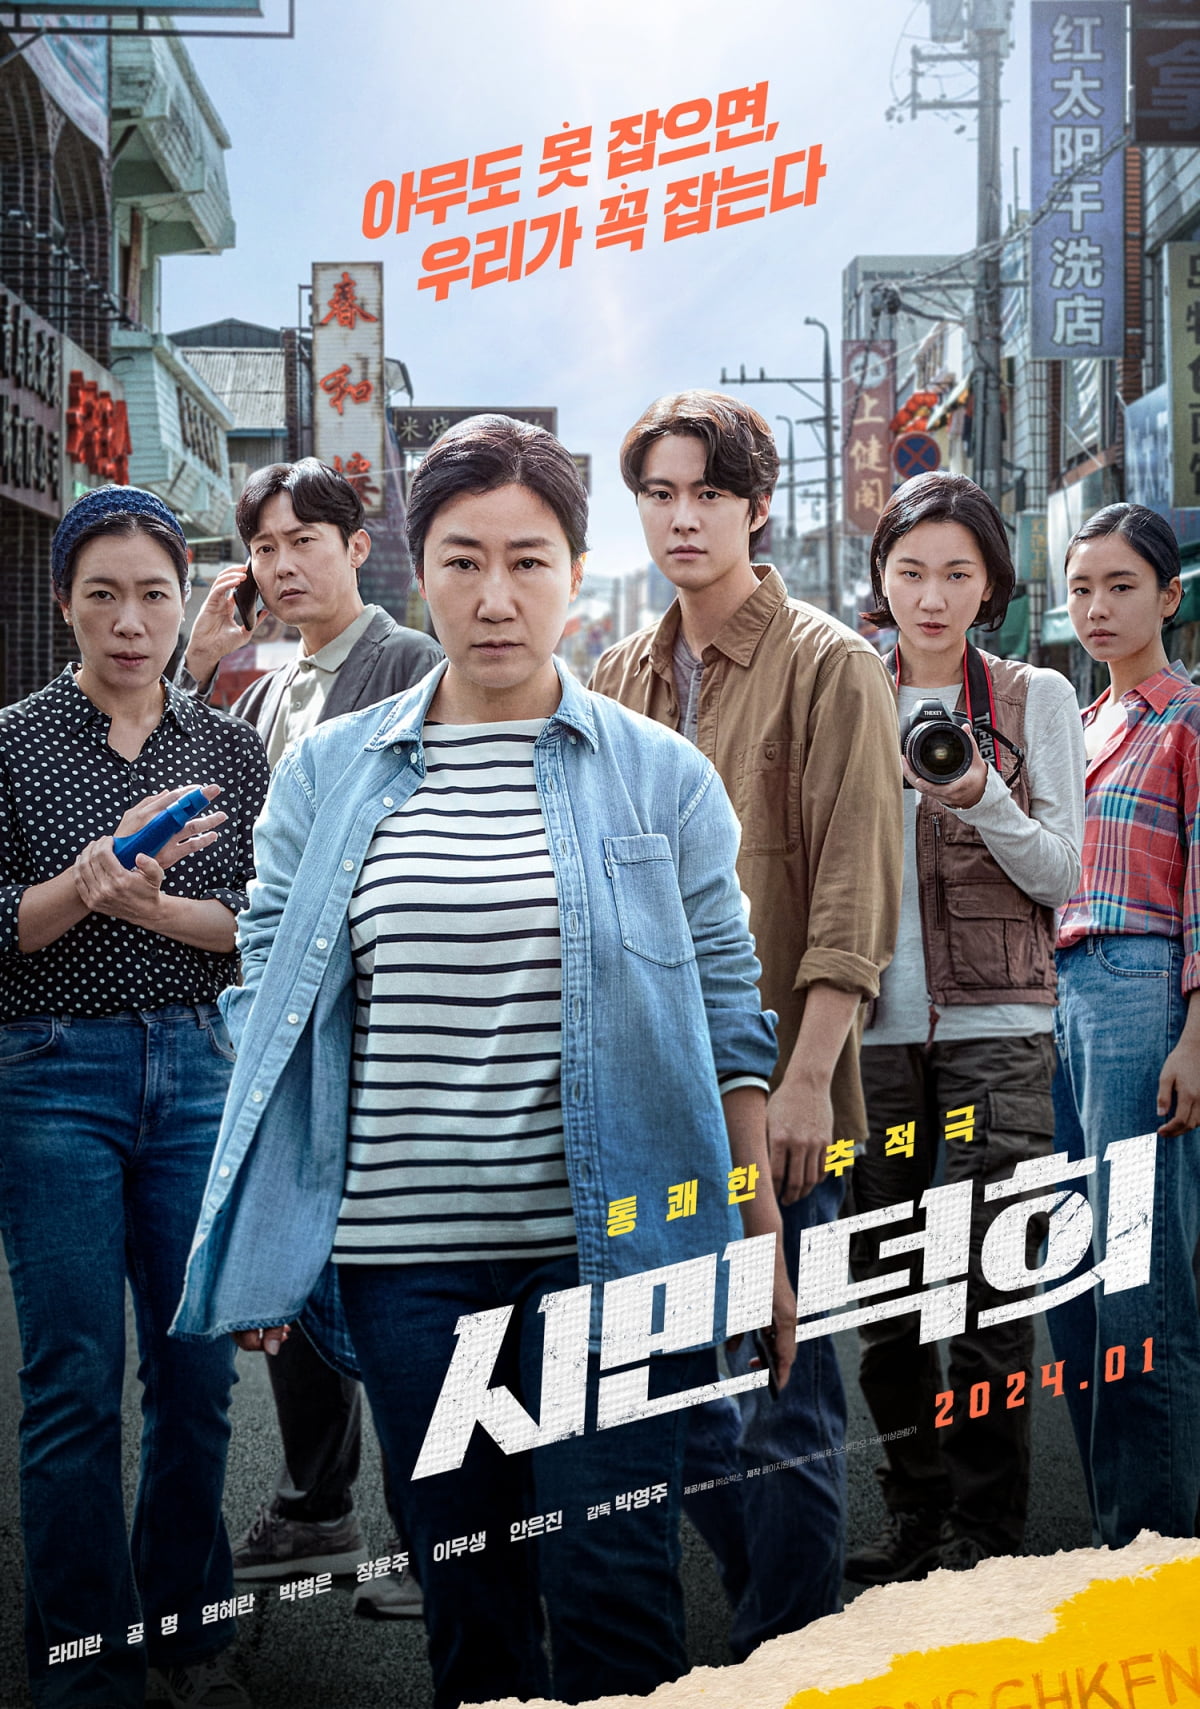 The movie 'Citizen of a Kind' is an exciting chase drama with actors Ra Mi-ran, Yeom Hye-ran, Jang Yoon-ju, and Ahn Eun-jin.